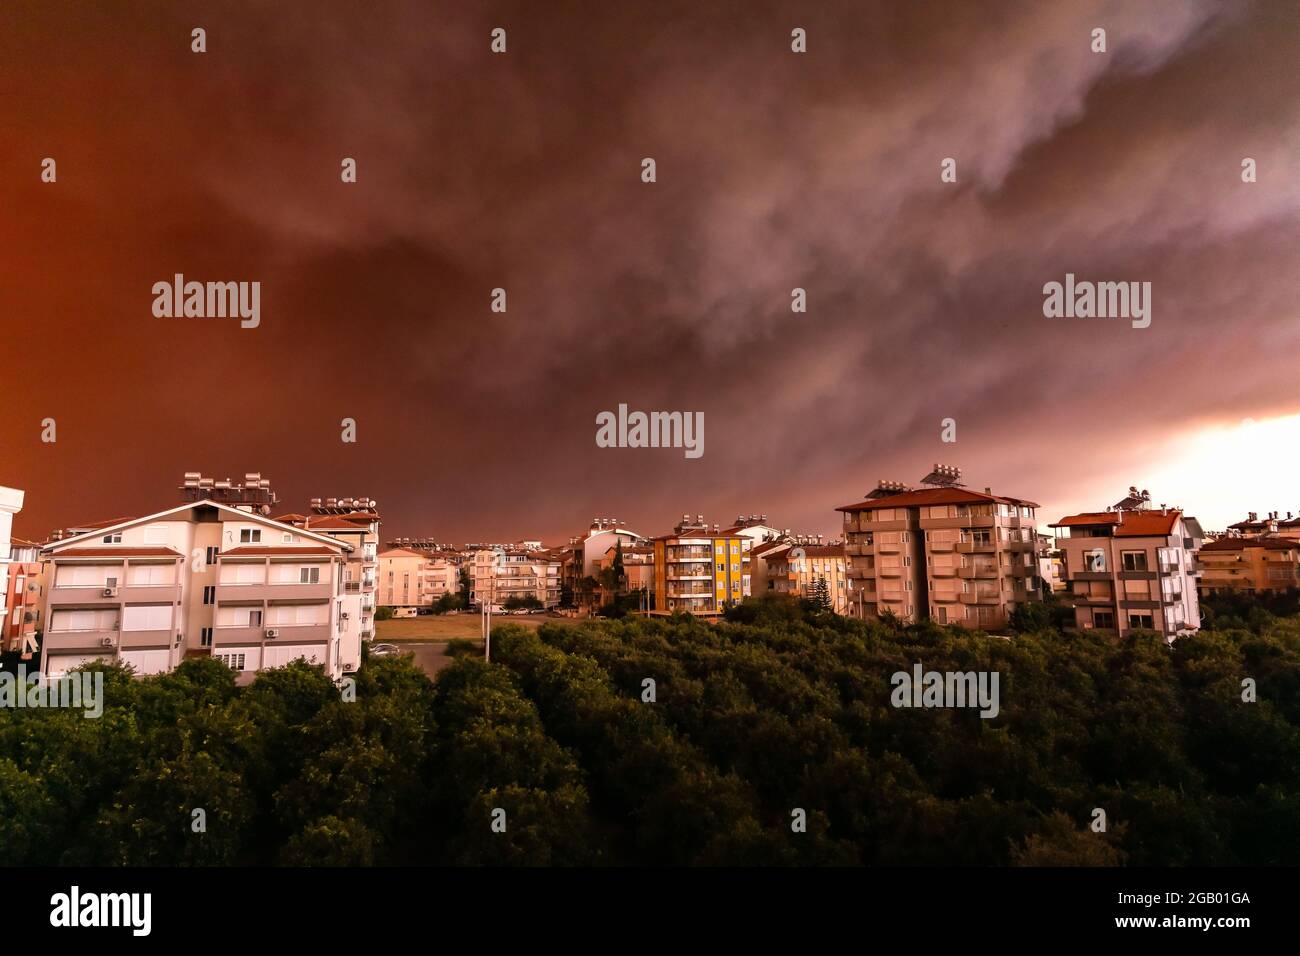 forest fire in Antalya, Manavgat Turkey, fumes, smokes in the city, fire planes and helicopters trying to put out the fire. Stock Photo